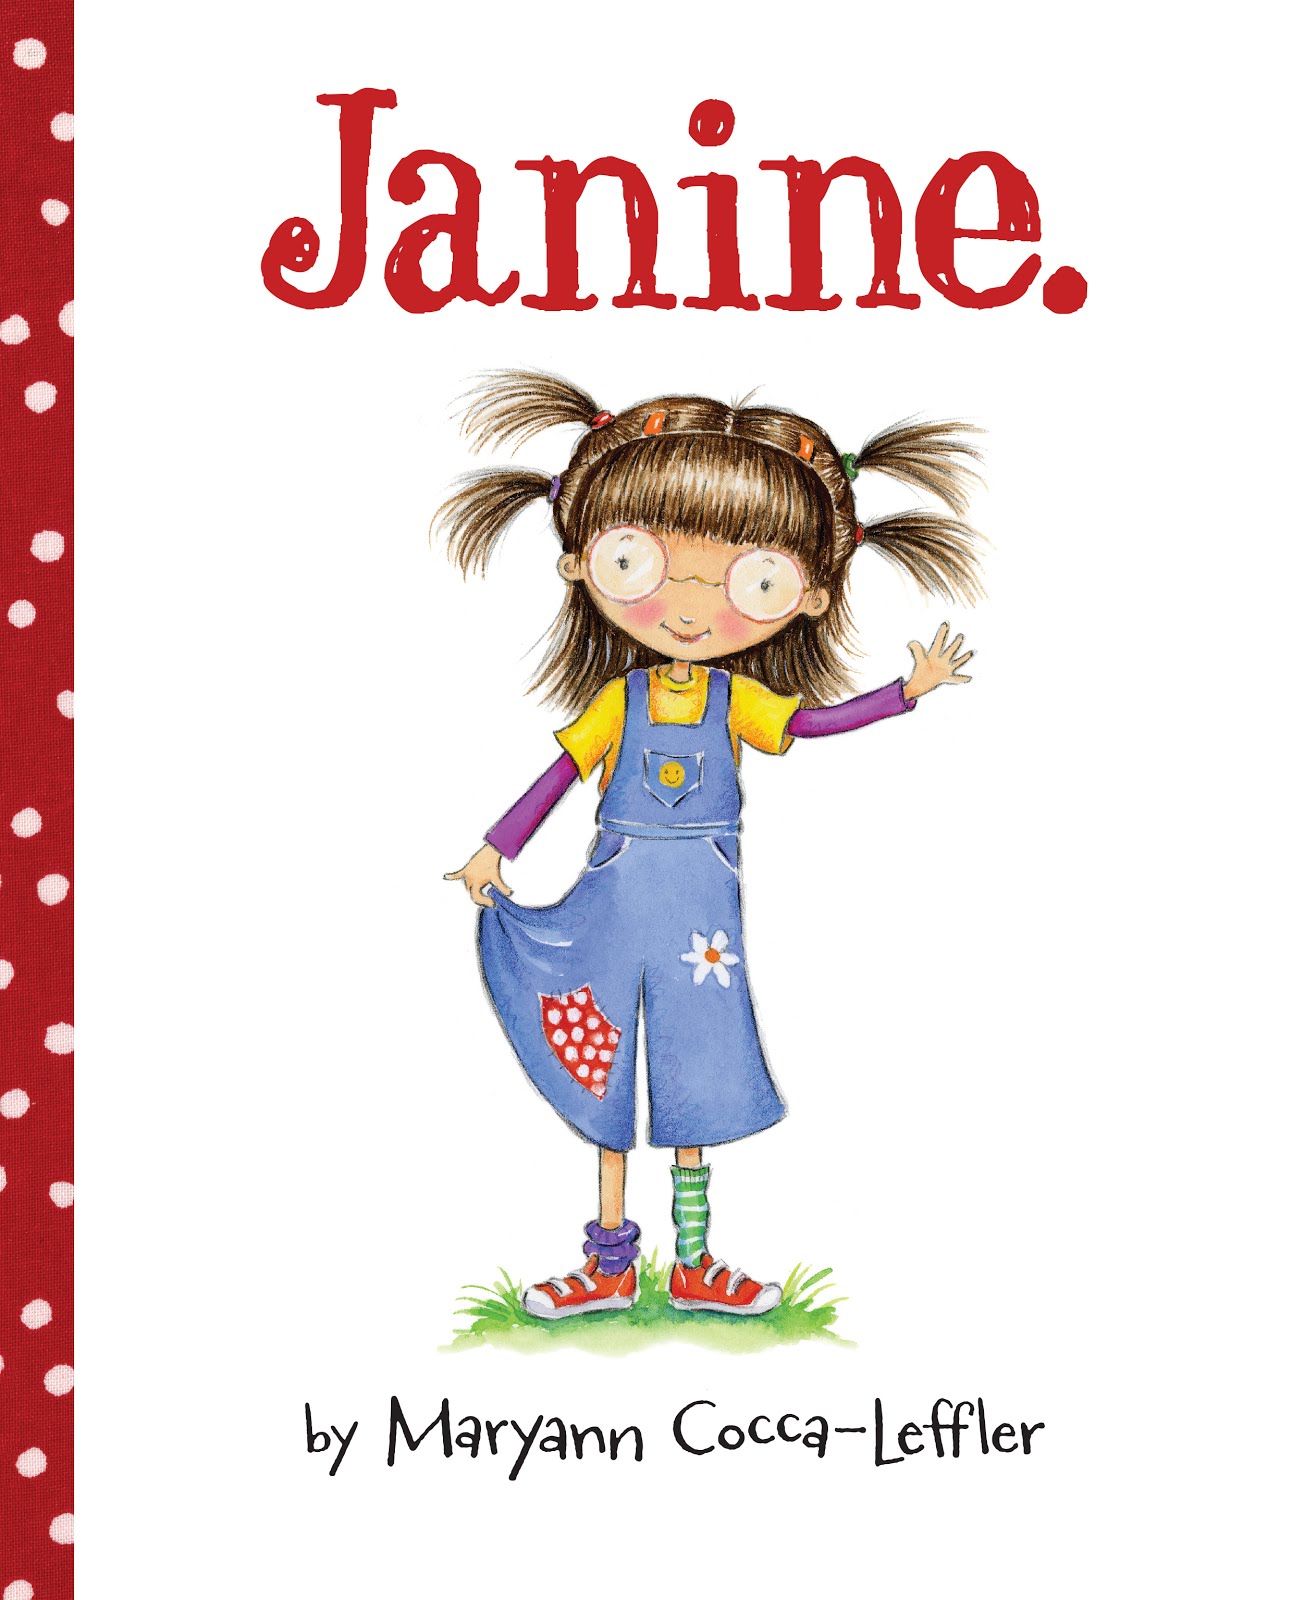 Don't forget the JANINE books: